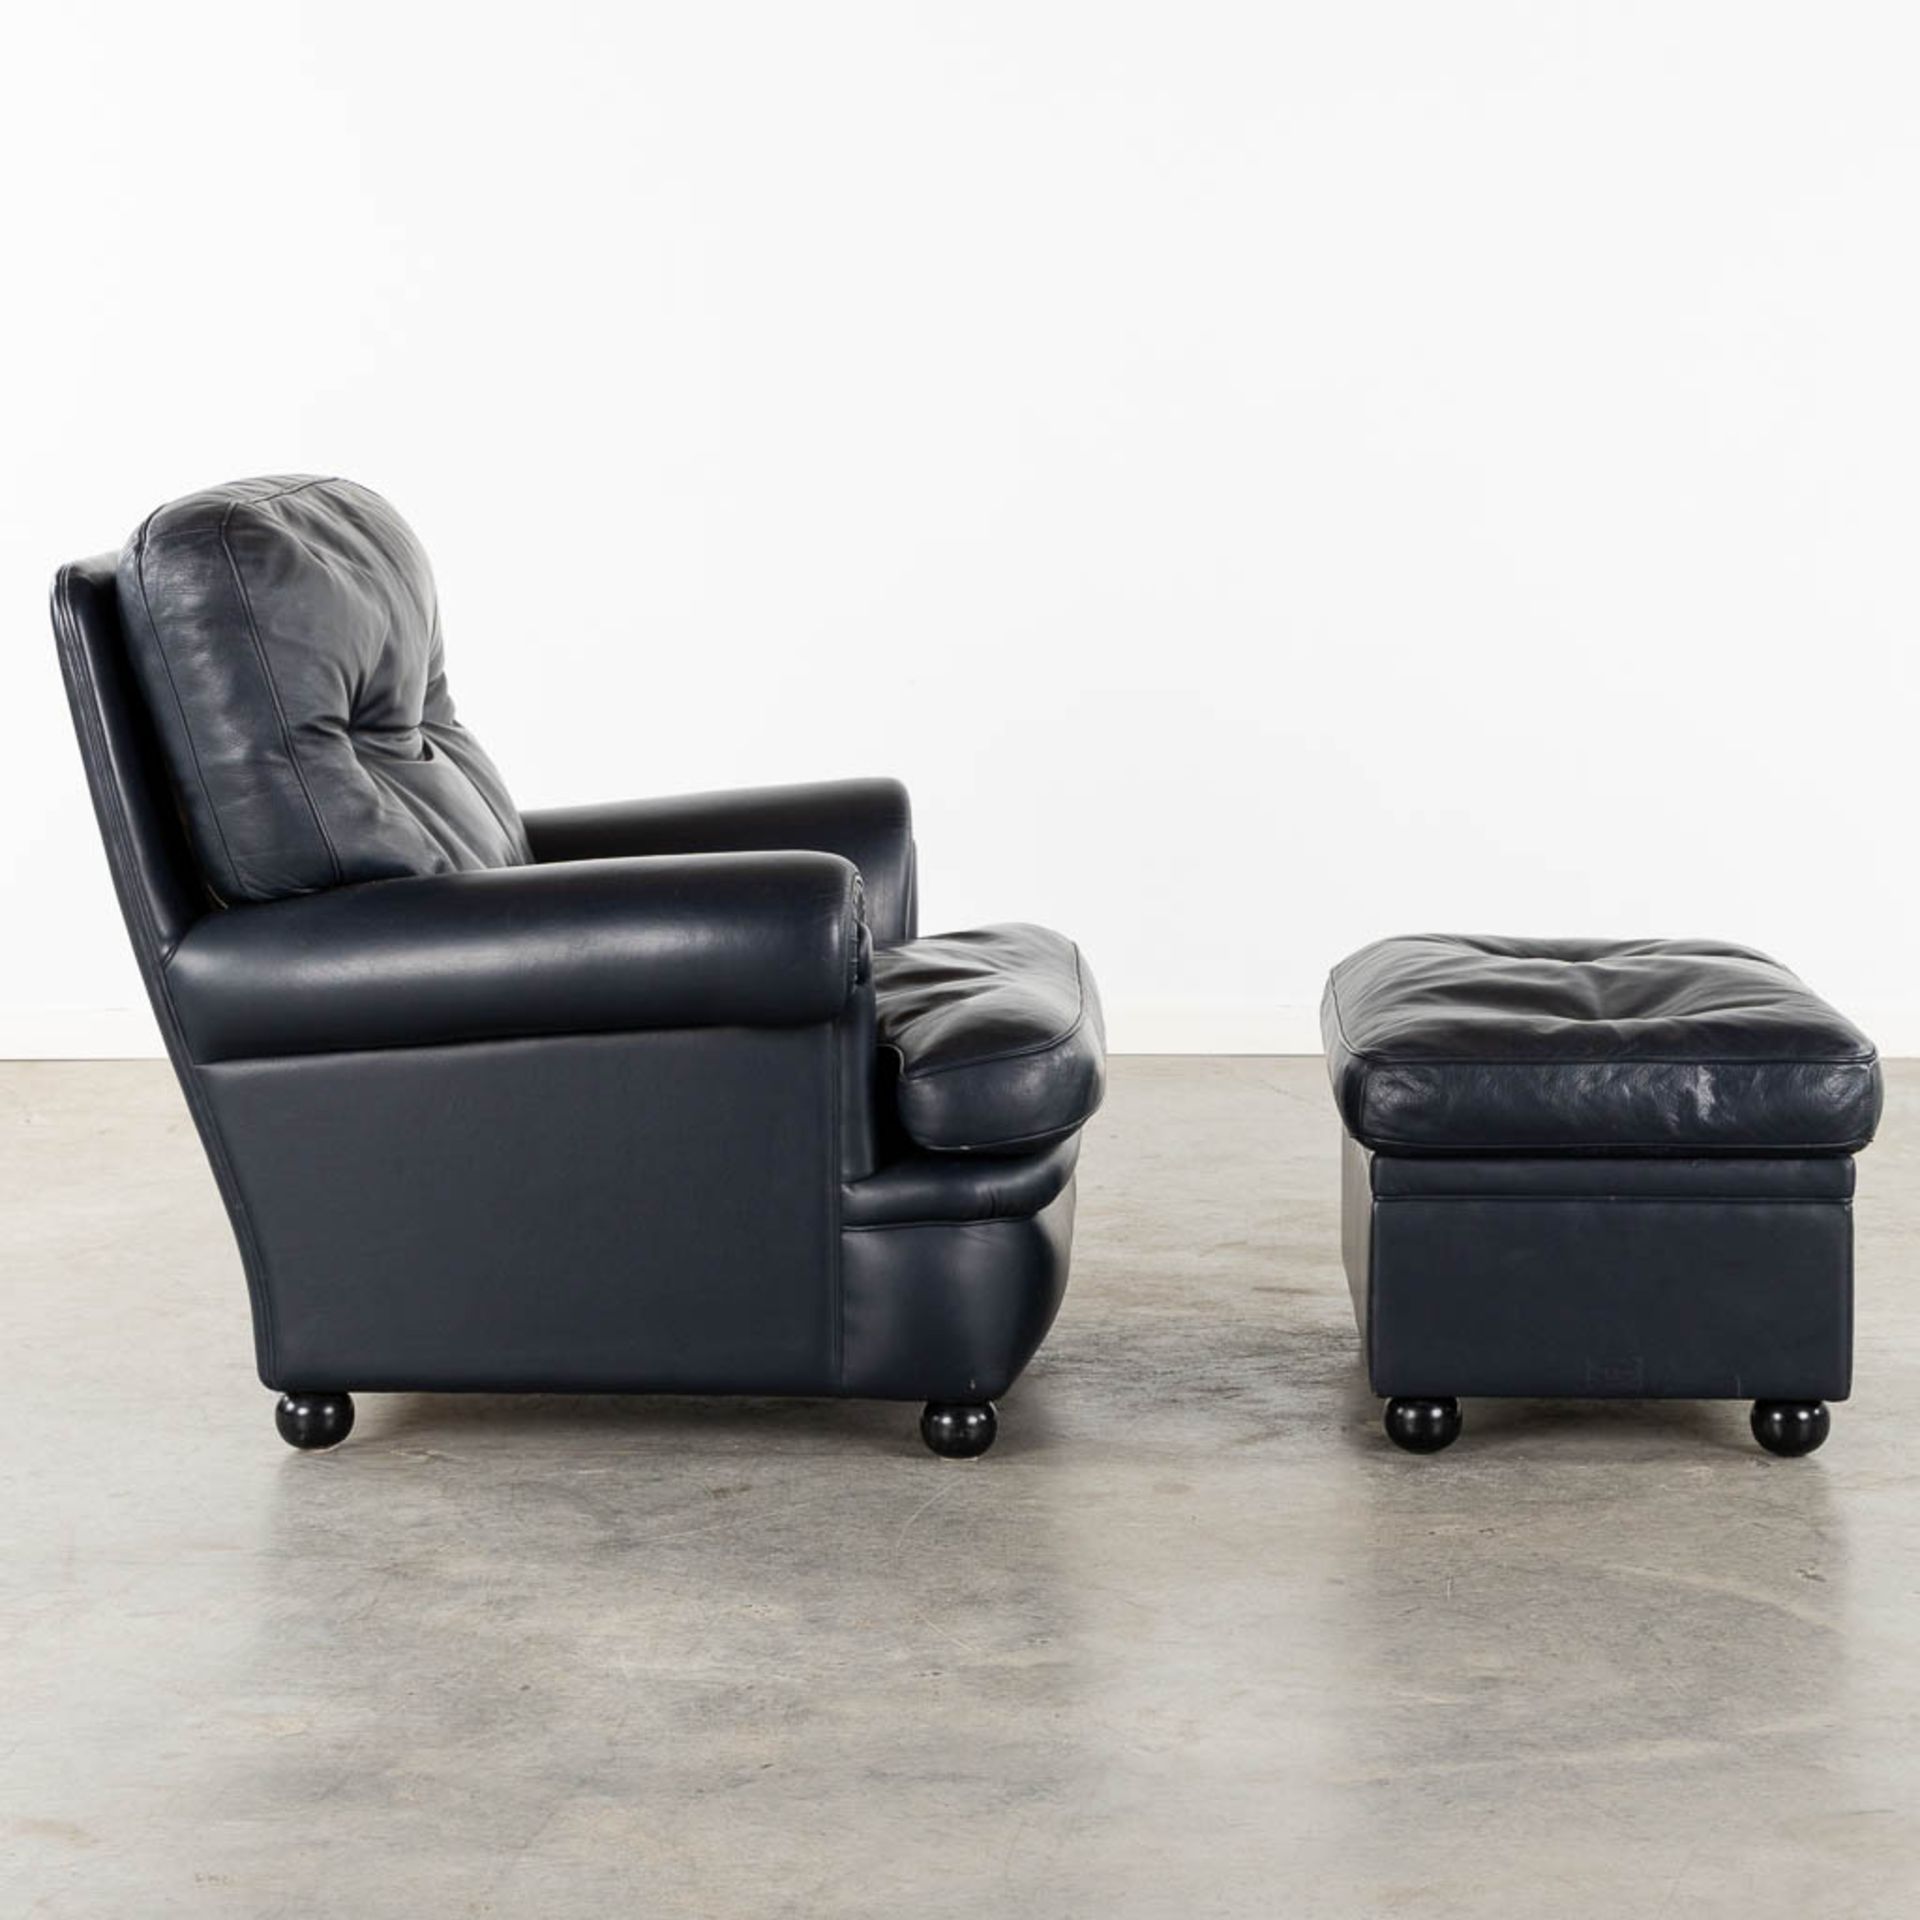 Poltrona Frau, a leather relaxing chair and matching ottoman. (L:90 x W:90 x H:88 cm) - Image 4 of 16